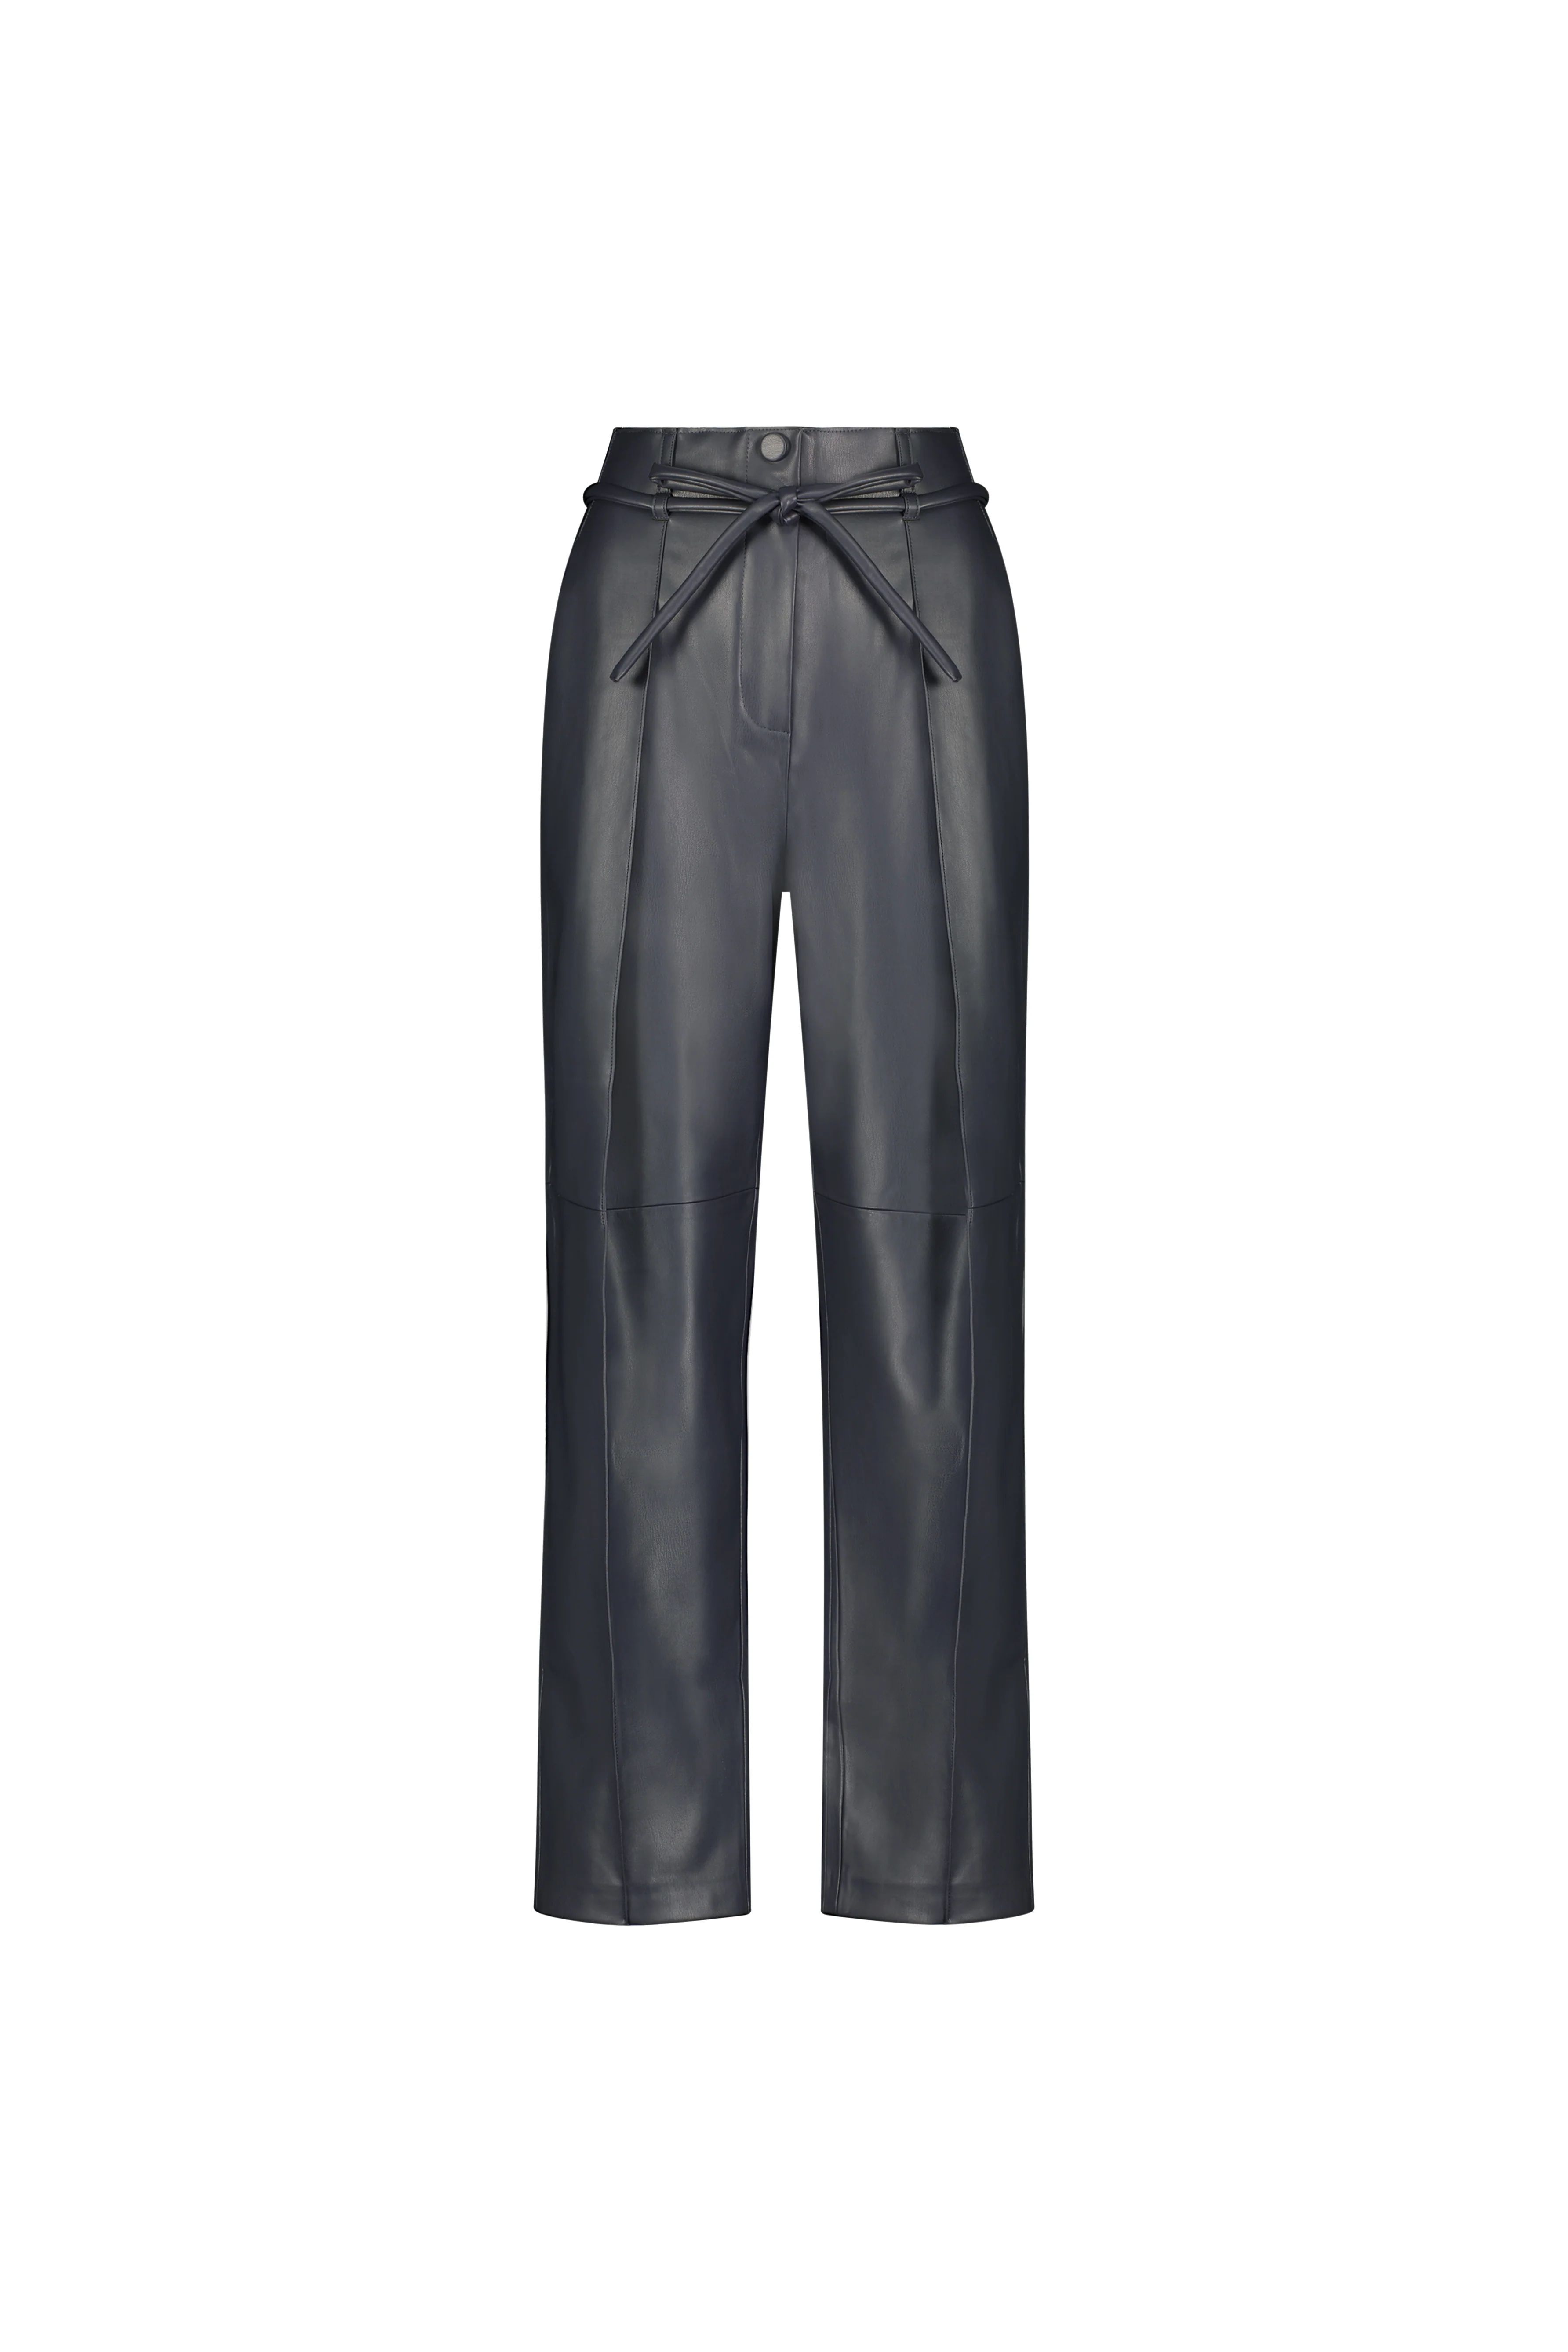 Vegan Leather Tapered Pant | MAYSON the label